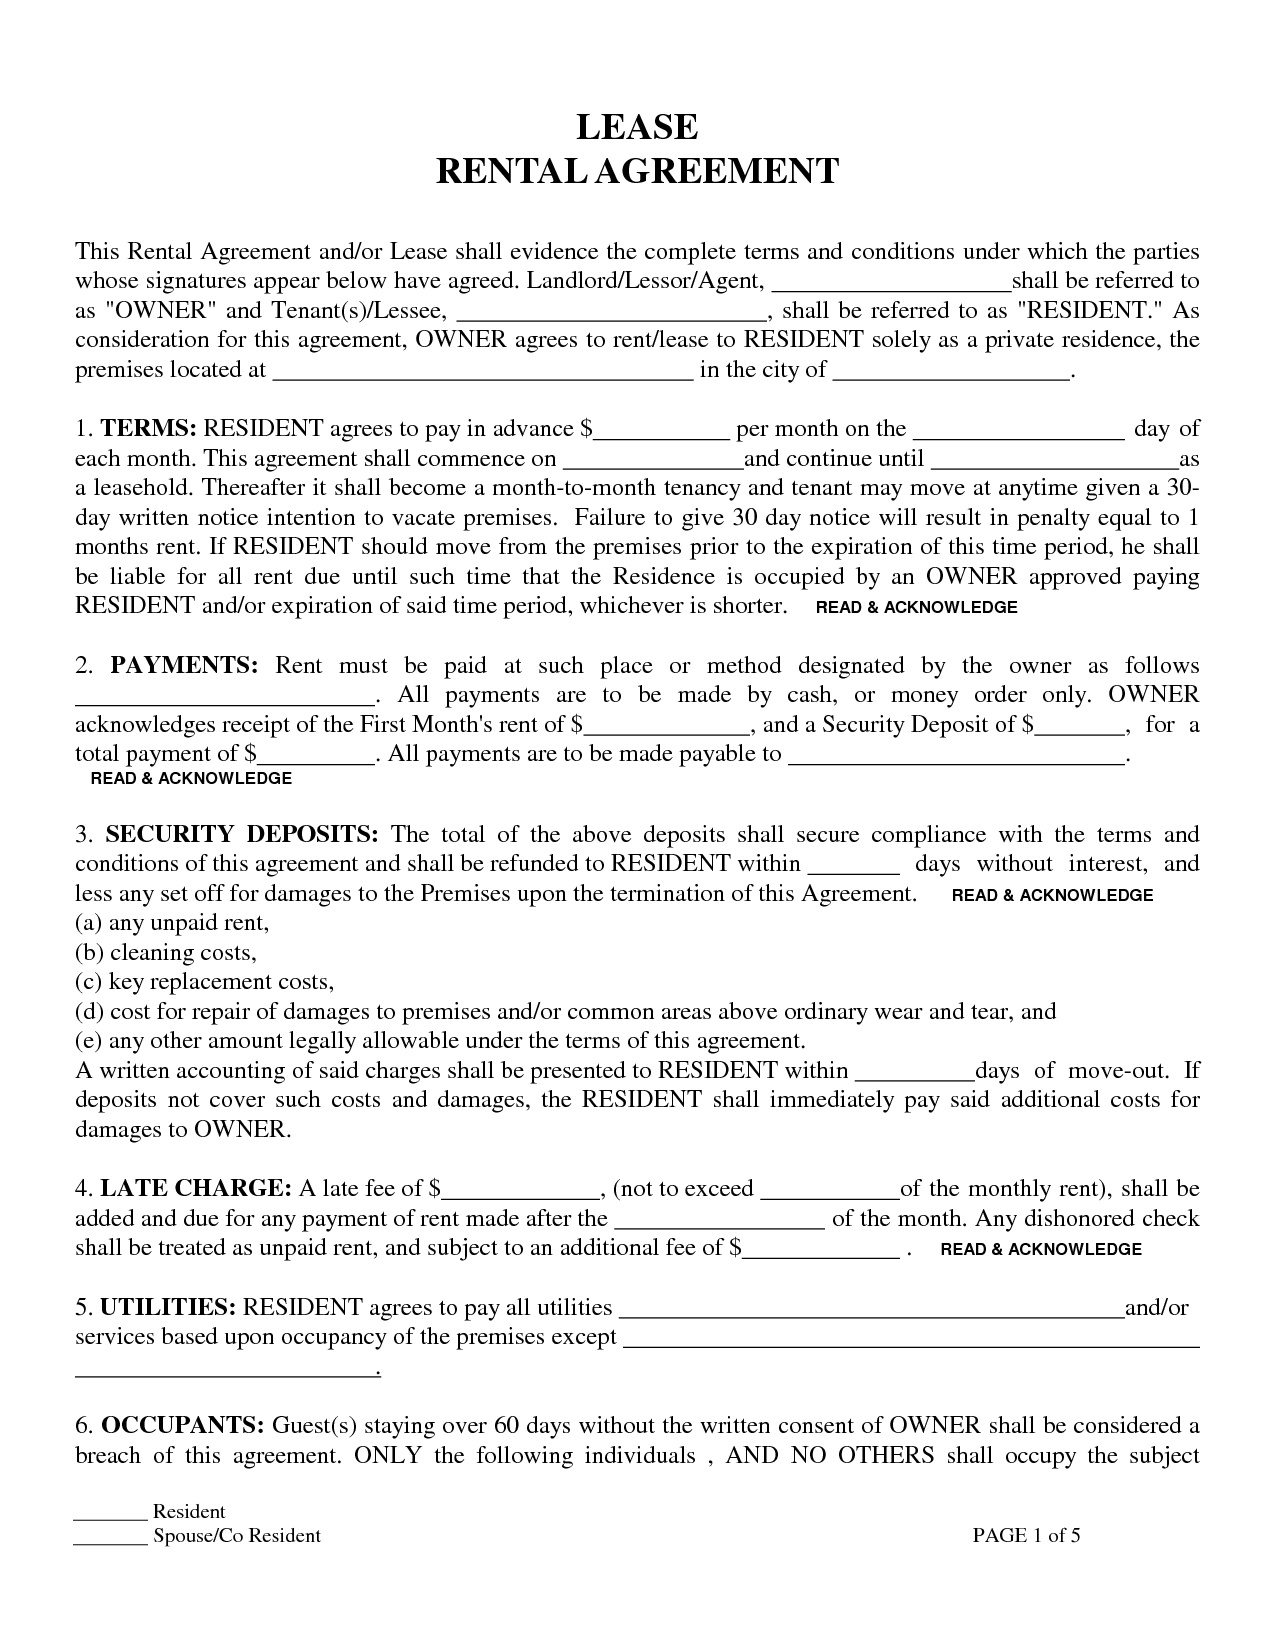 Apartment Lease Agreement Free Printable | Ellipsis - Free Printable Rental Agreement